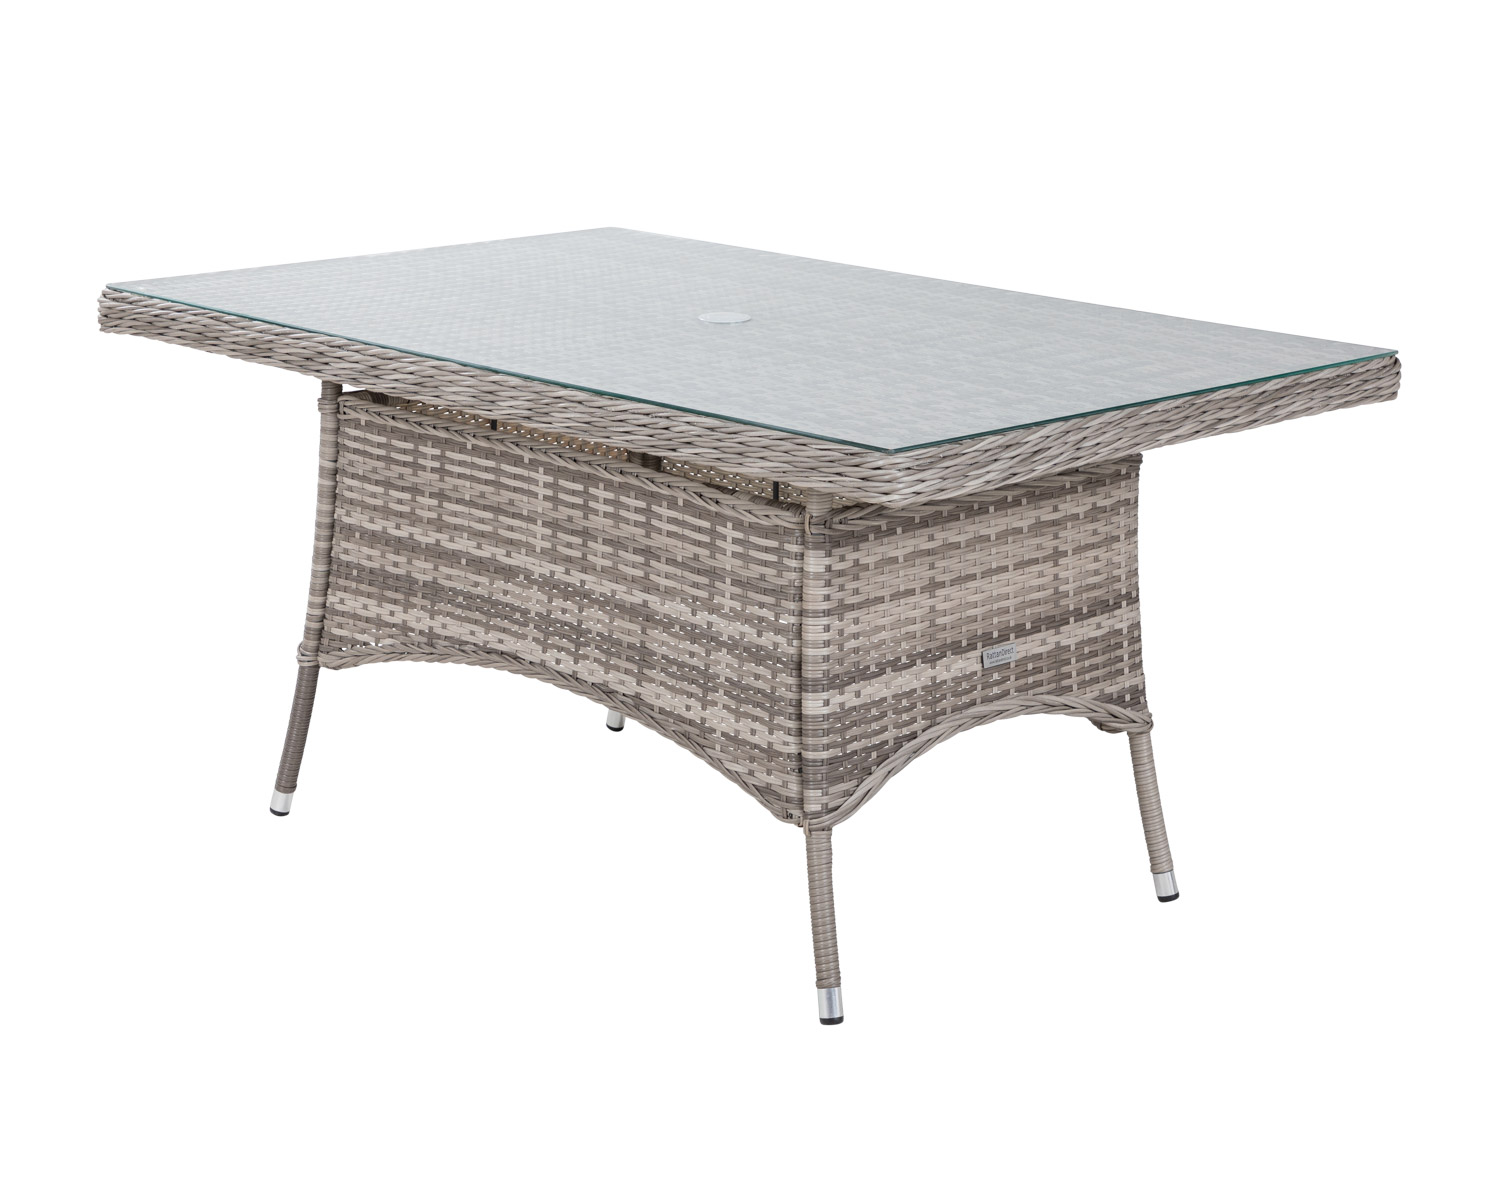 Rattan Garden Small Rectangular Dining Table In Grey With Glass Top Rattan Direct